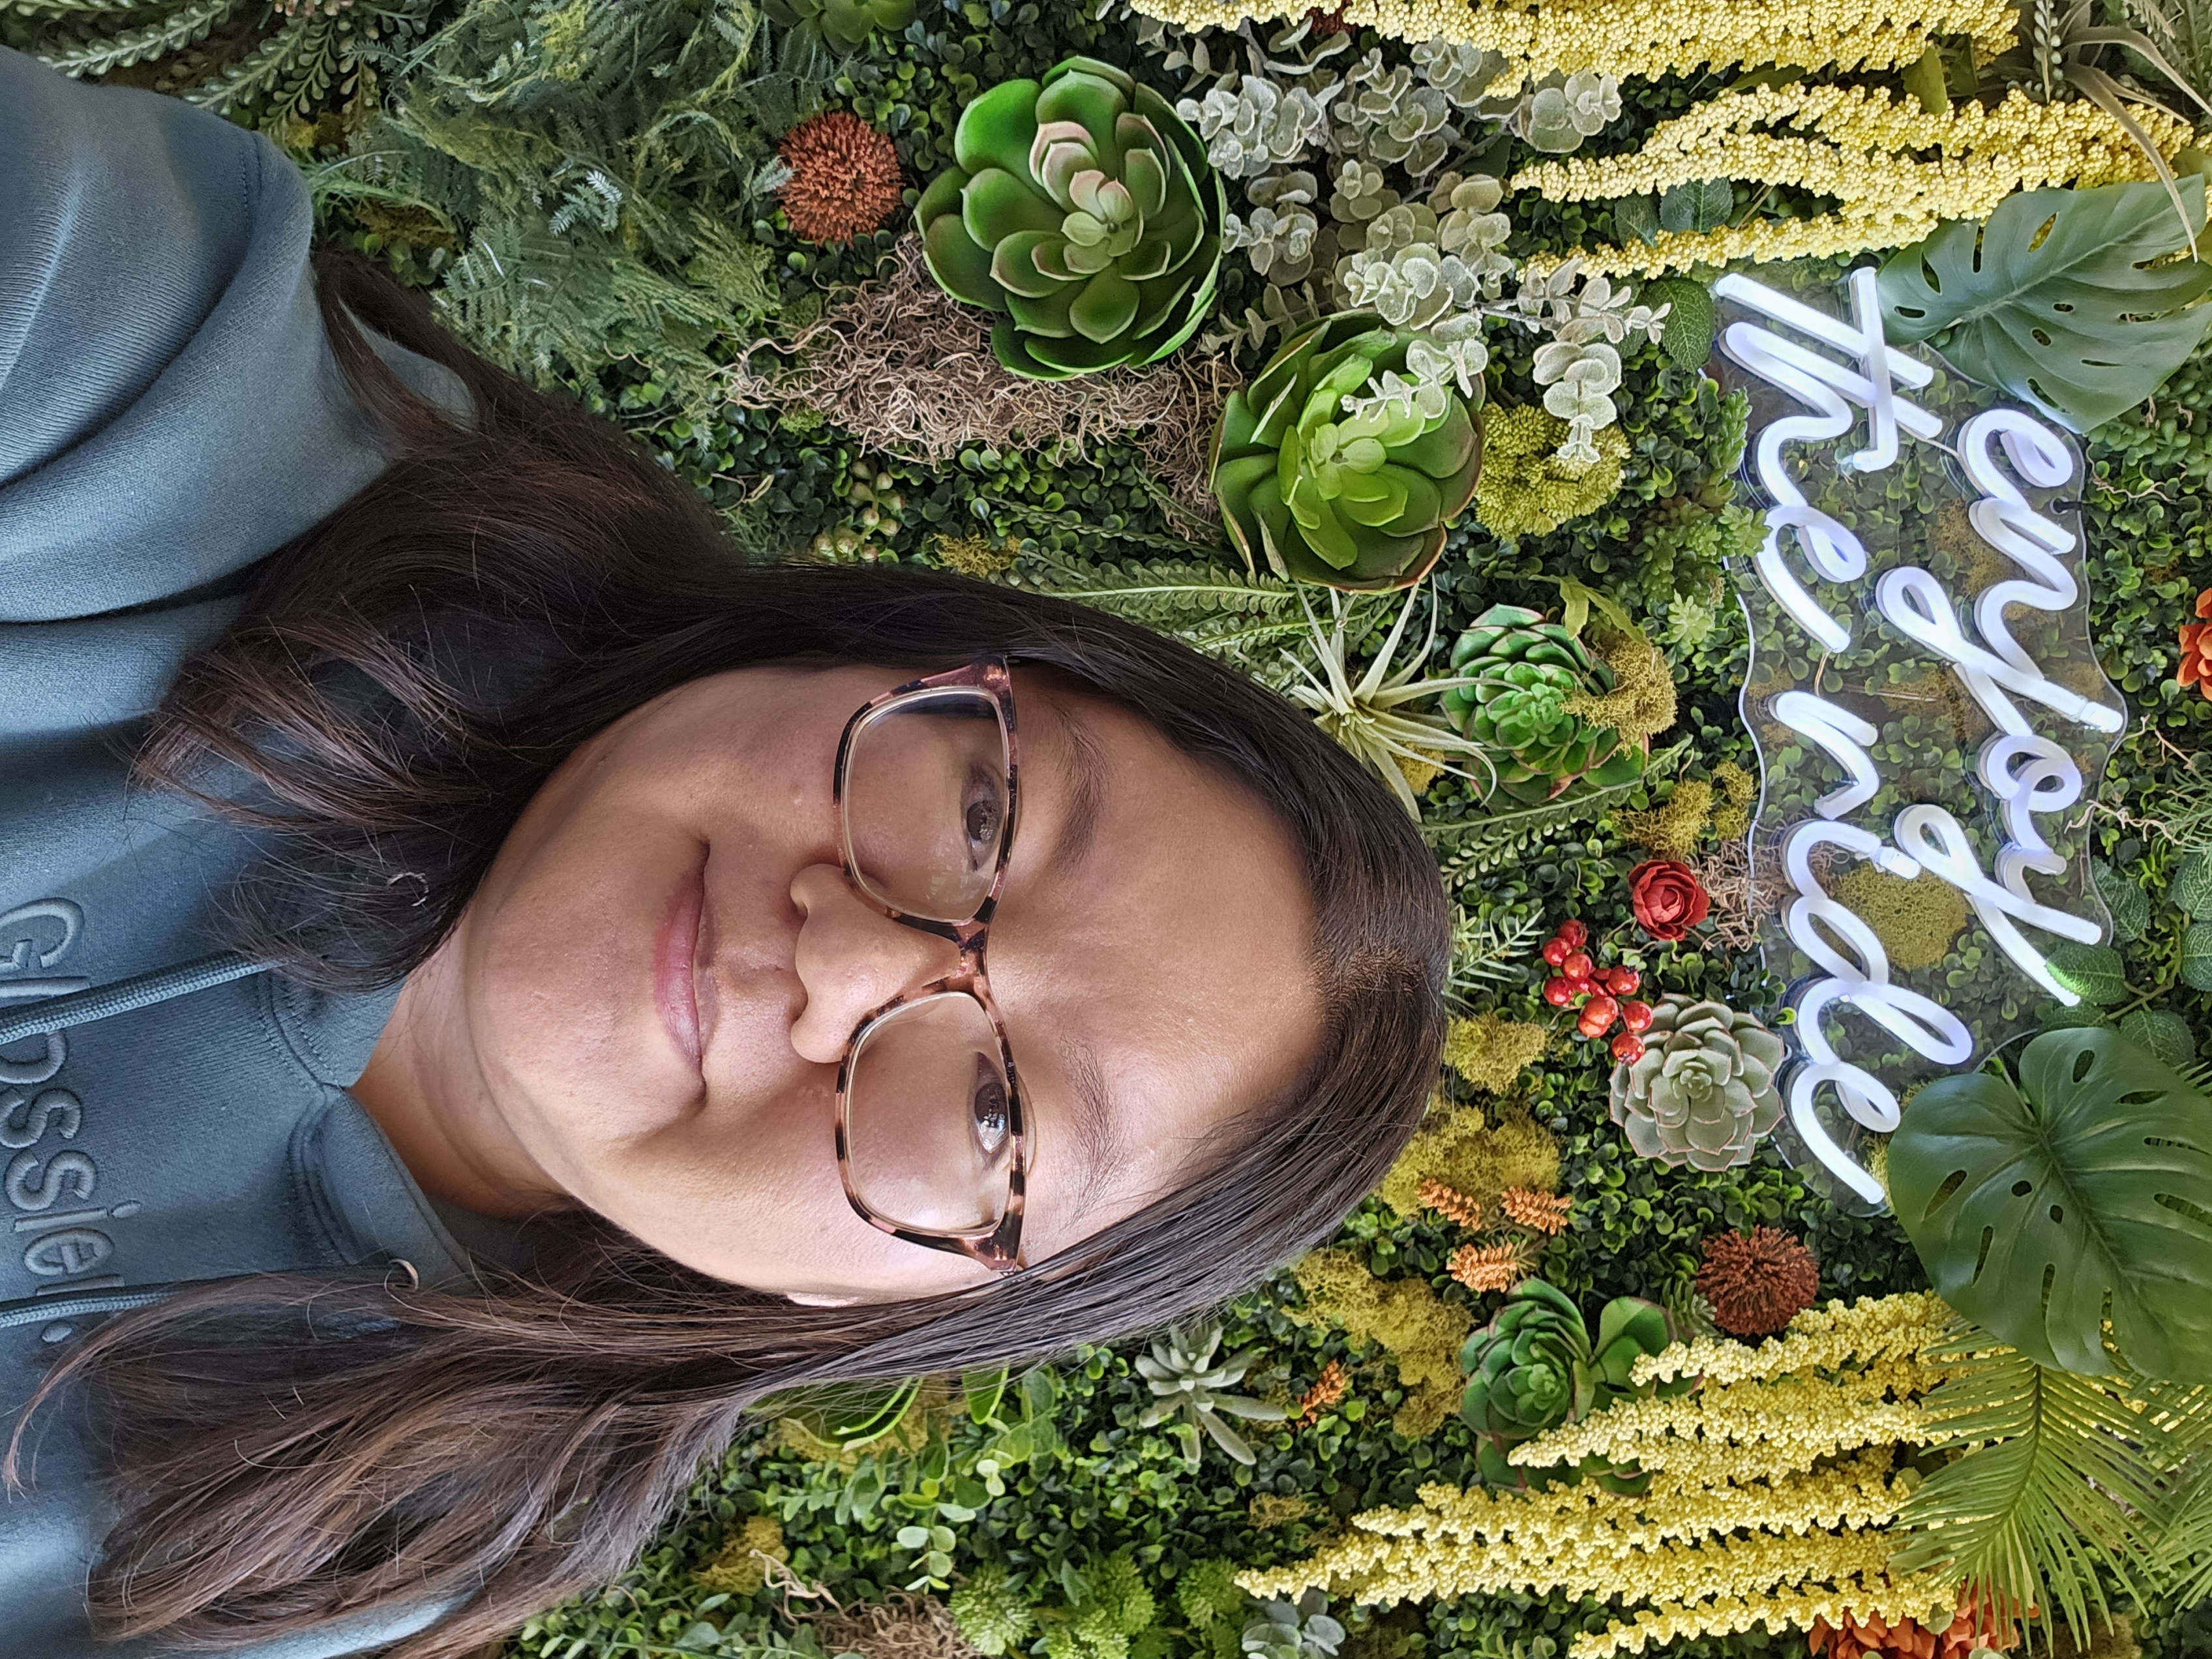 Selfie of Christine taken with a green floral backdrop